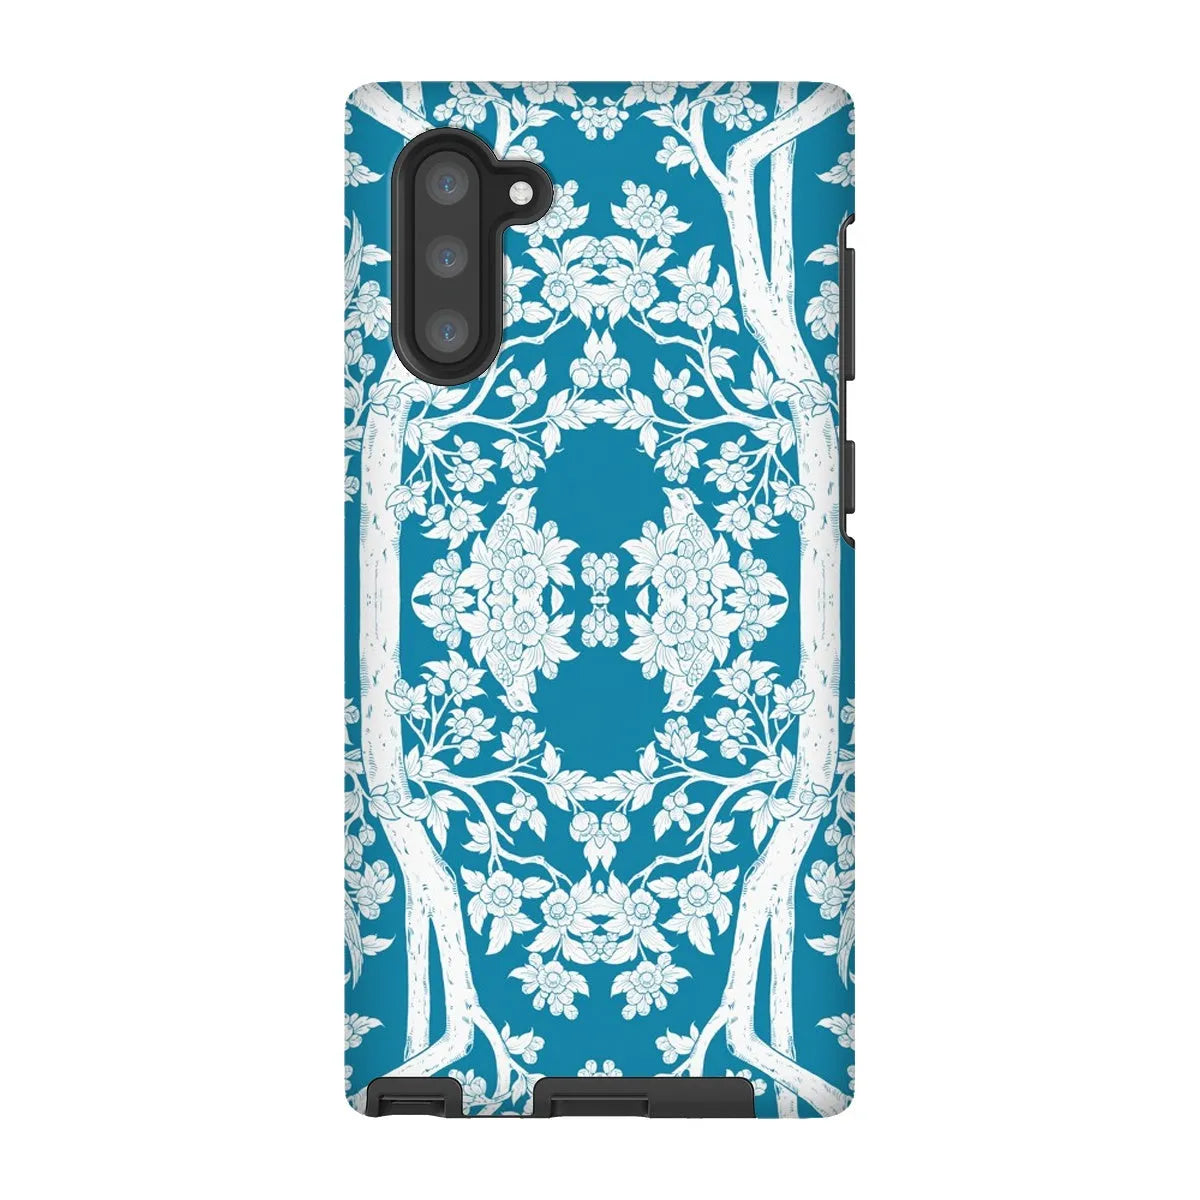 Aviary Blue Aesthetic Pattern Art Phone Case - Samsung Galaxy Note 10 / Matte - Mobile Phone Cases - Aesthetic Art